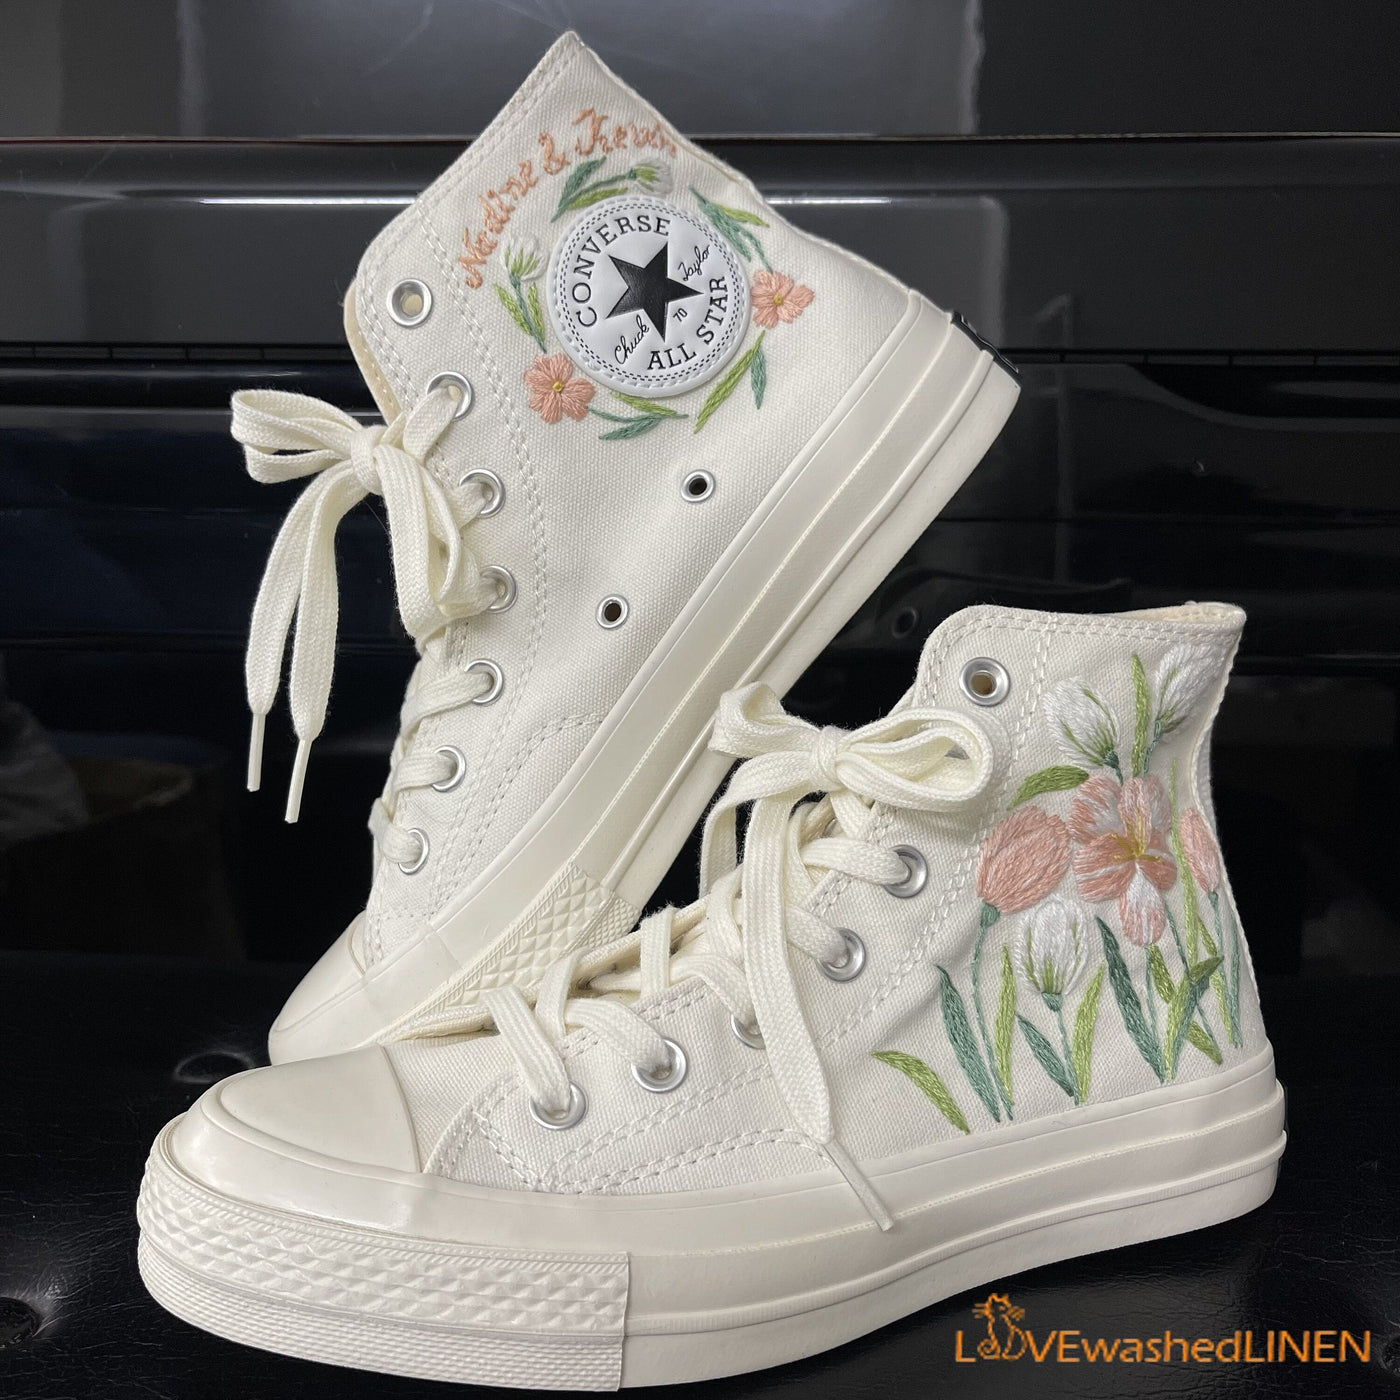 Custom Coverse Chuck Taylor Wedding Flowers Embroidered Converse Brida